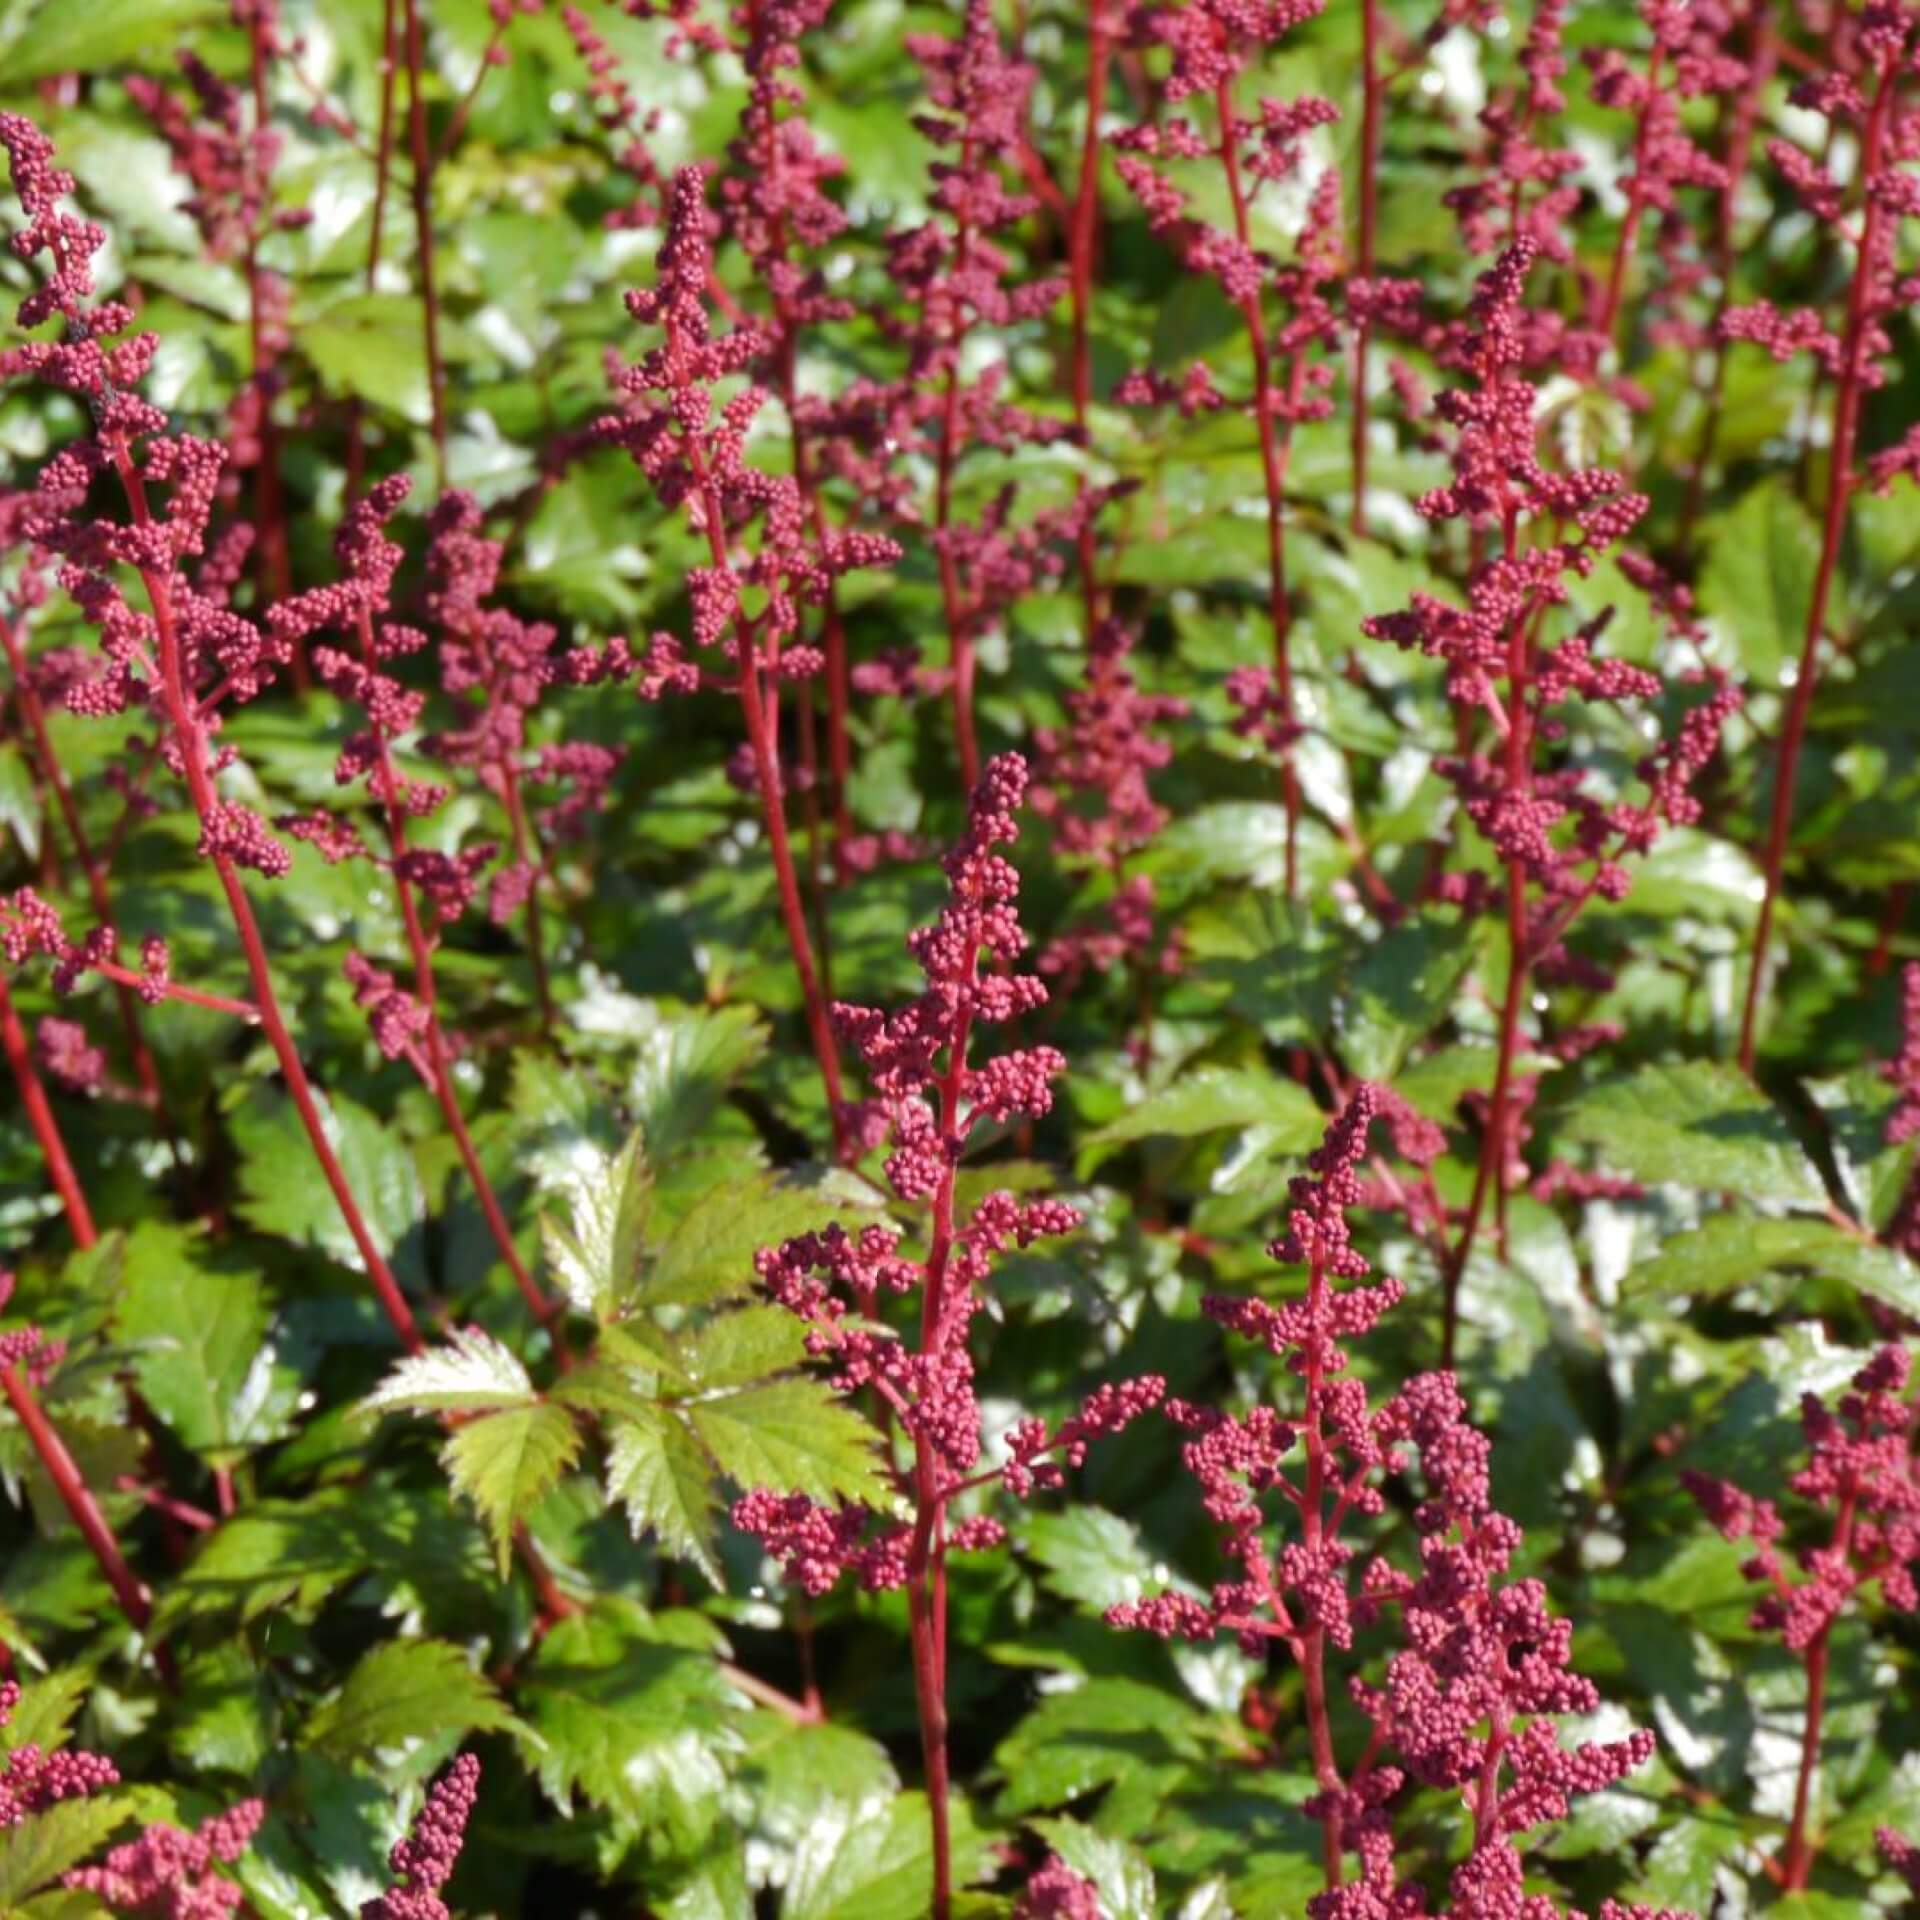 Arends Prachtspiere 'Fanal' (Astilbe x arendsii 'Fanal')